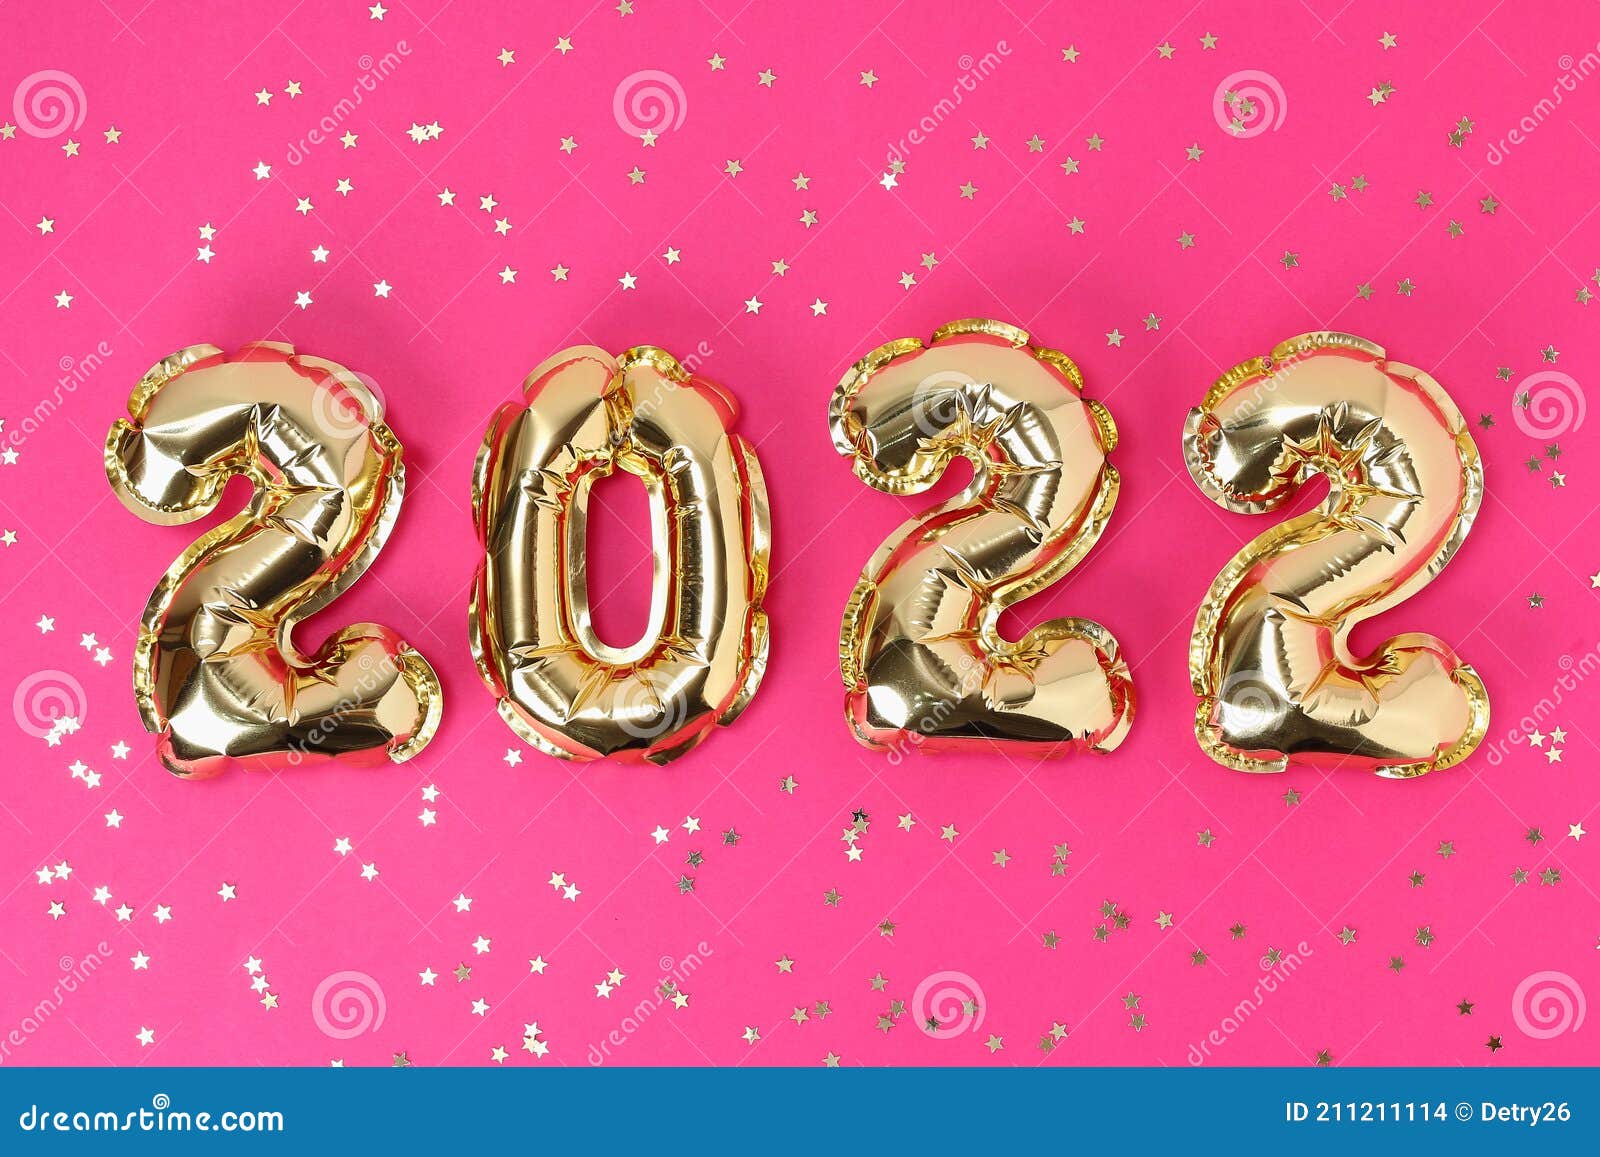 New Year 2022. Foil Balloons Numbers 2022 On Pink Background. New Year